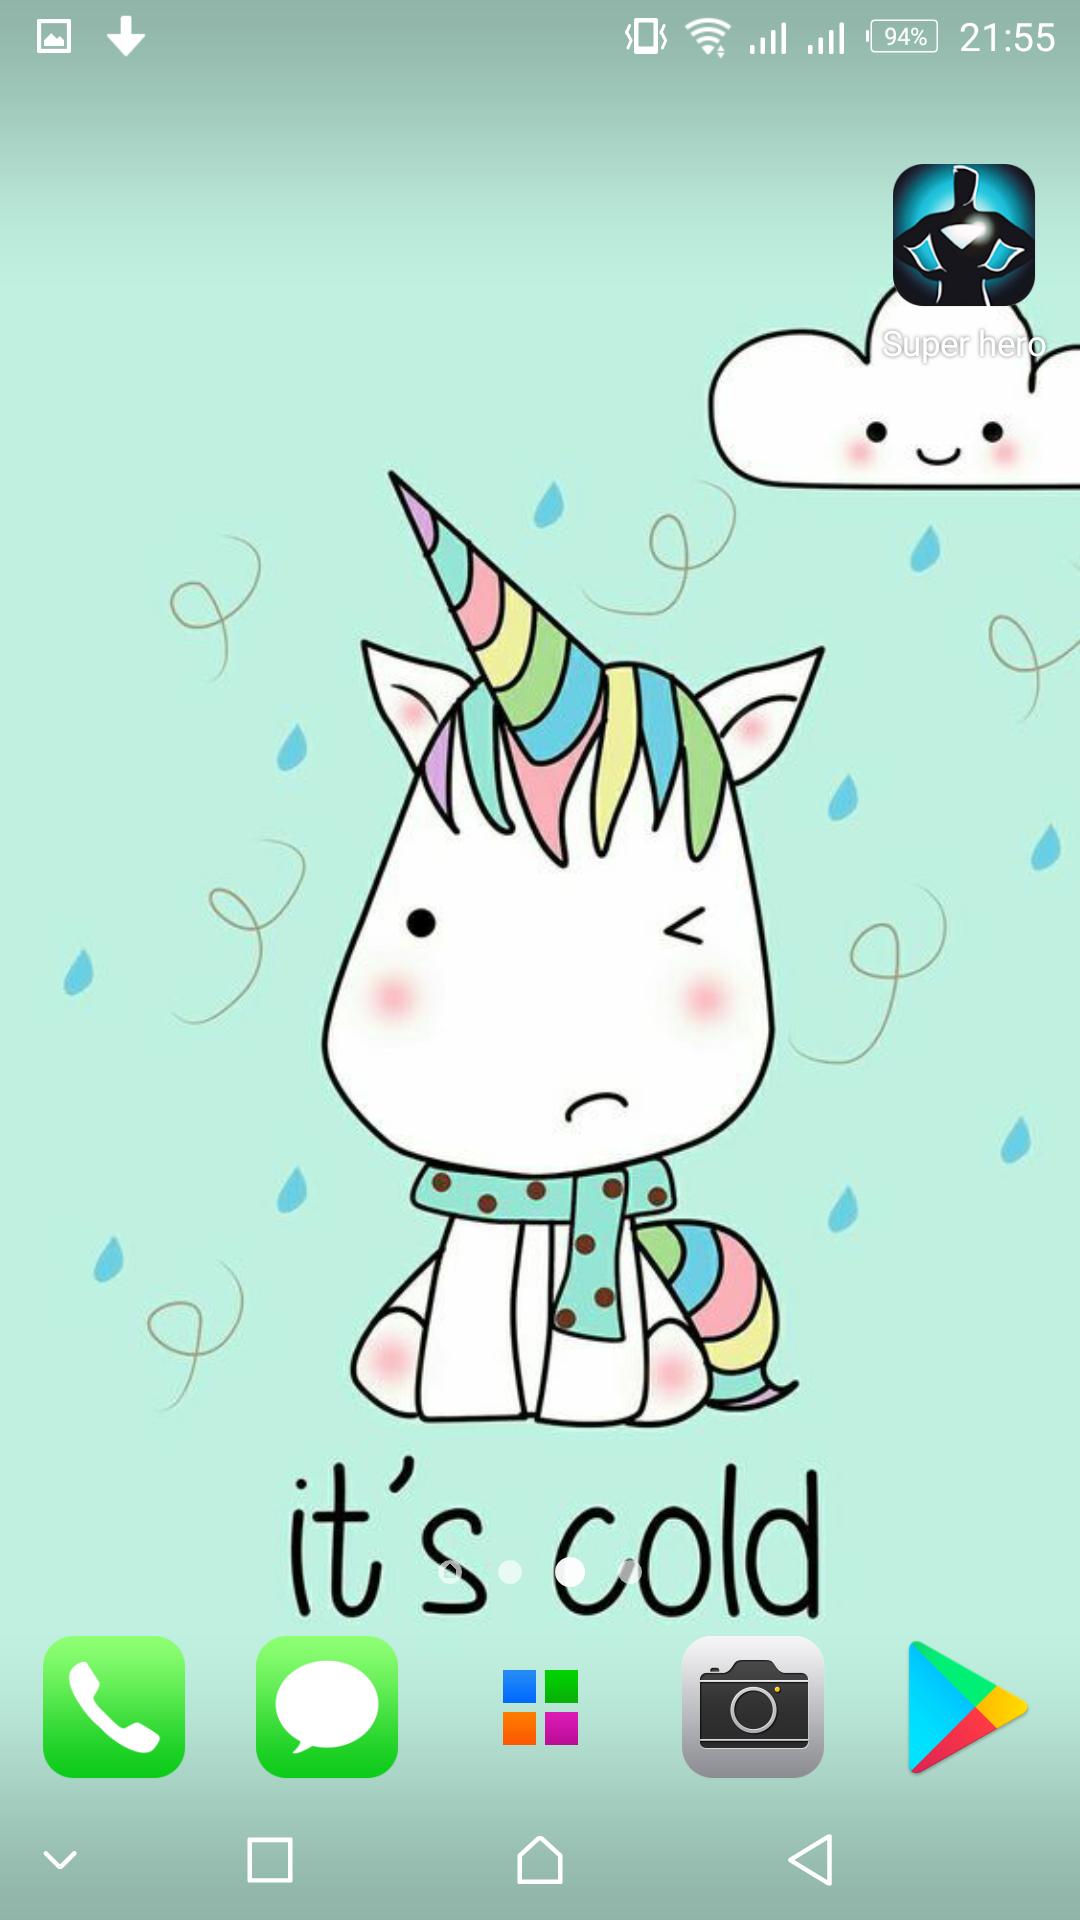 Unicorn Imut Wallpaper For Android APK Download